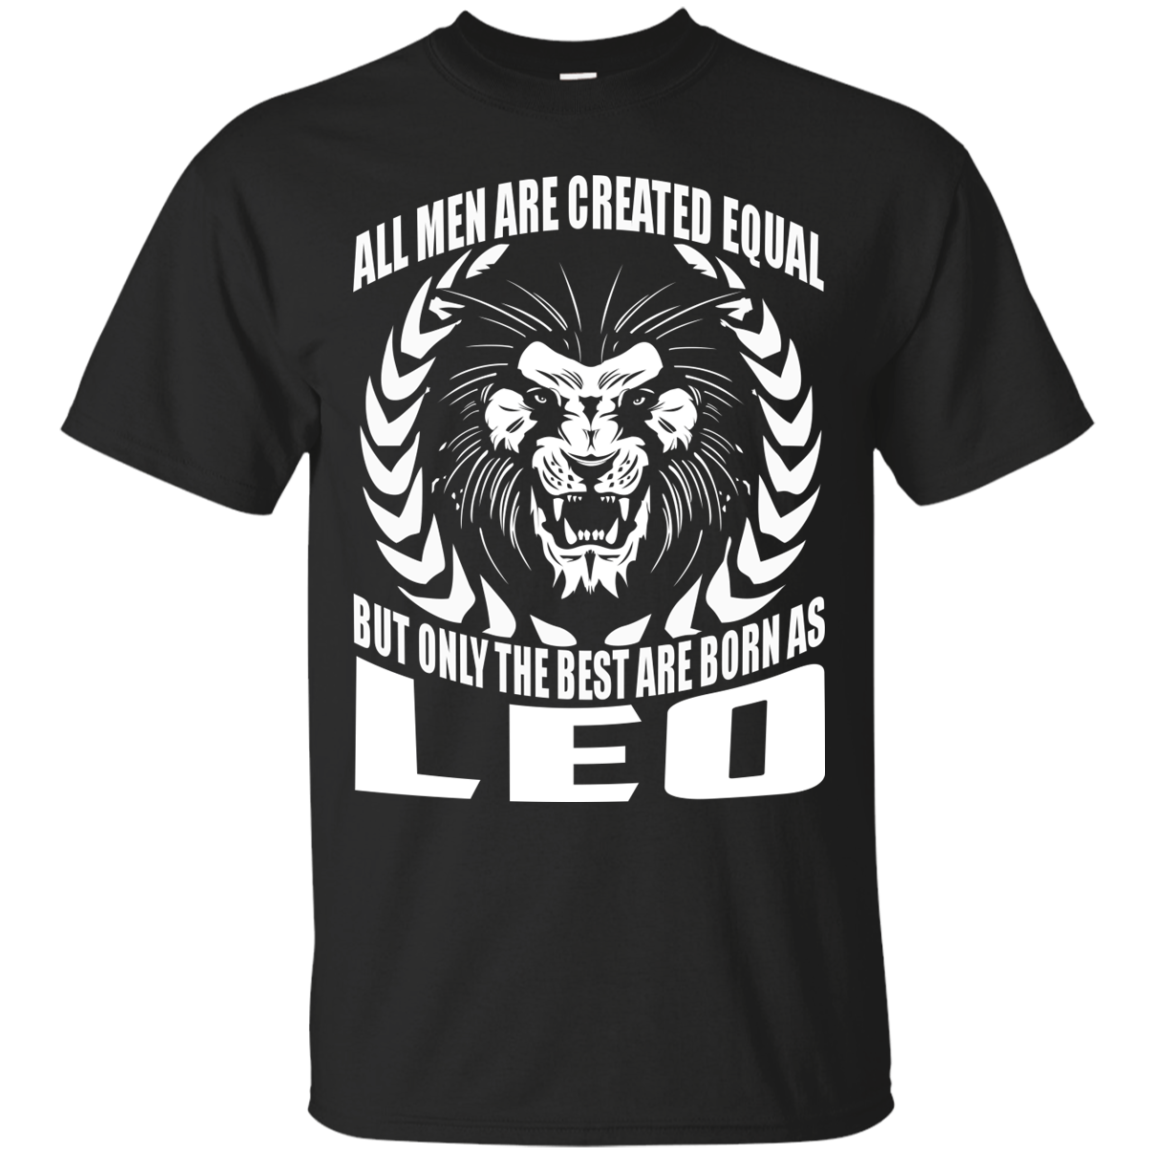 Only the best are born as Leo shirts - Zodiac Tees